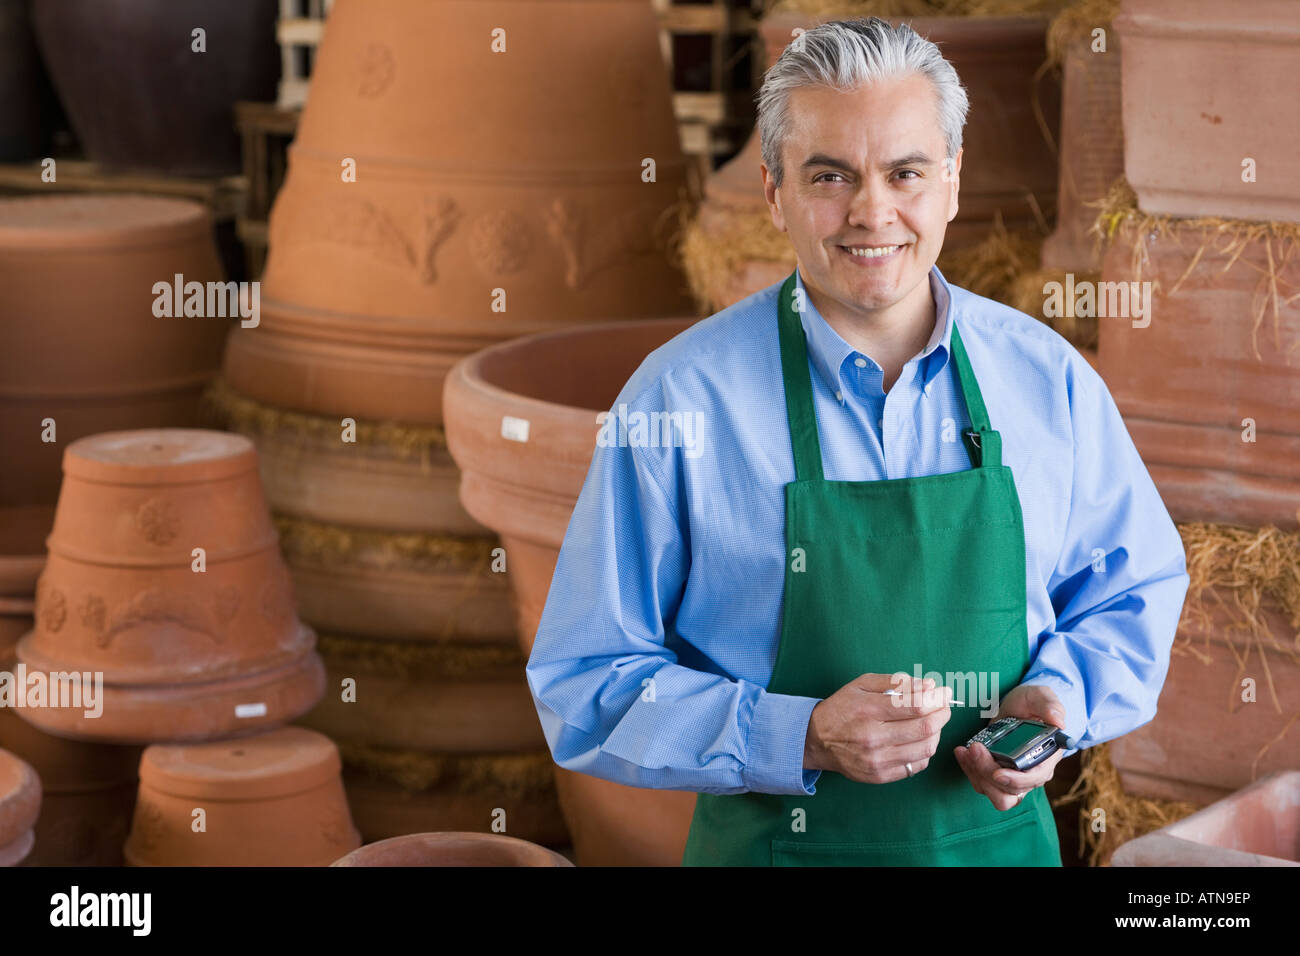 Hispanic man working at garden centre Banque D'Images